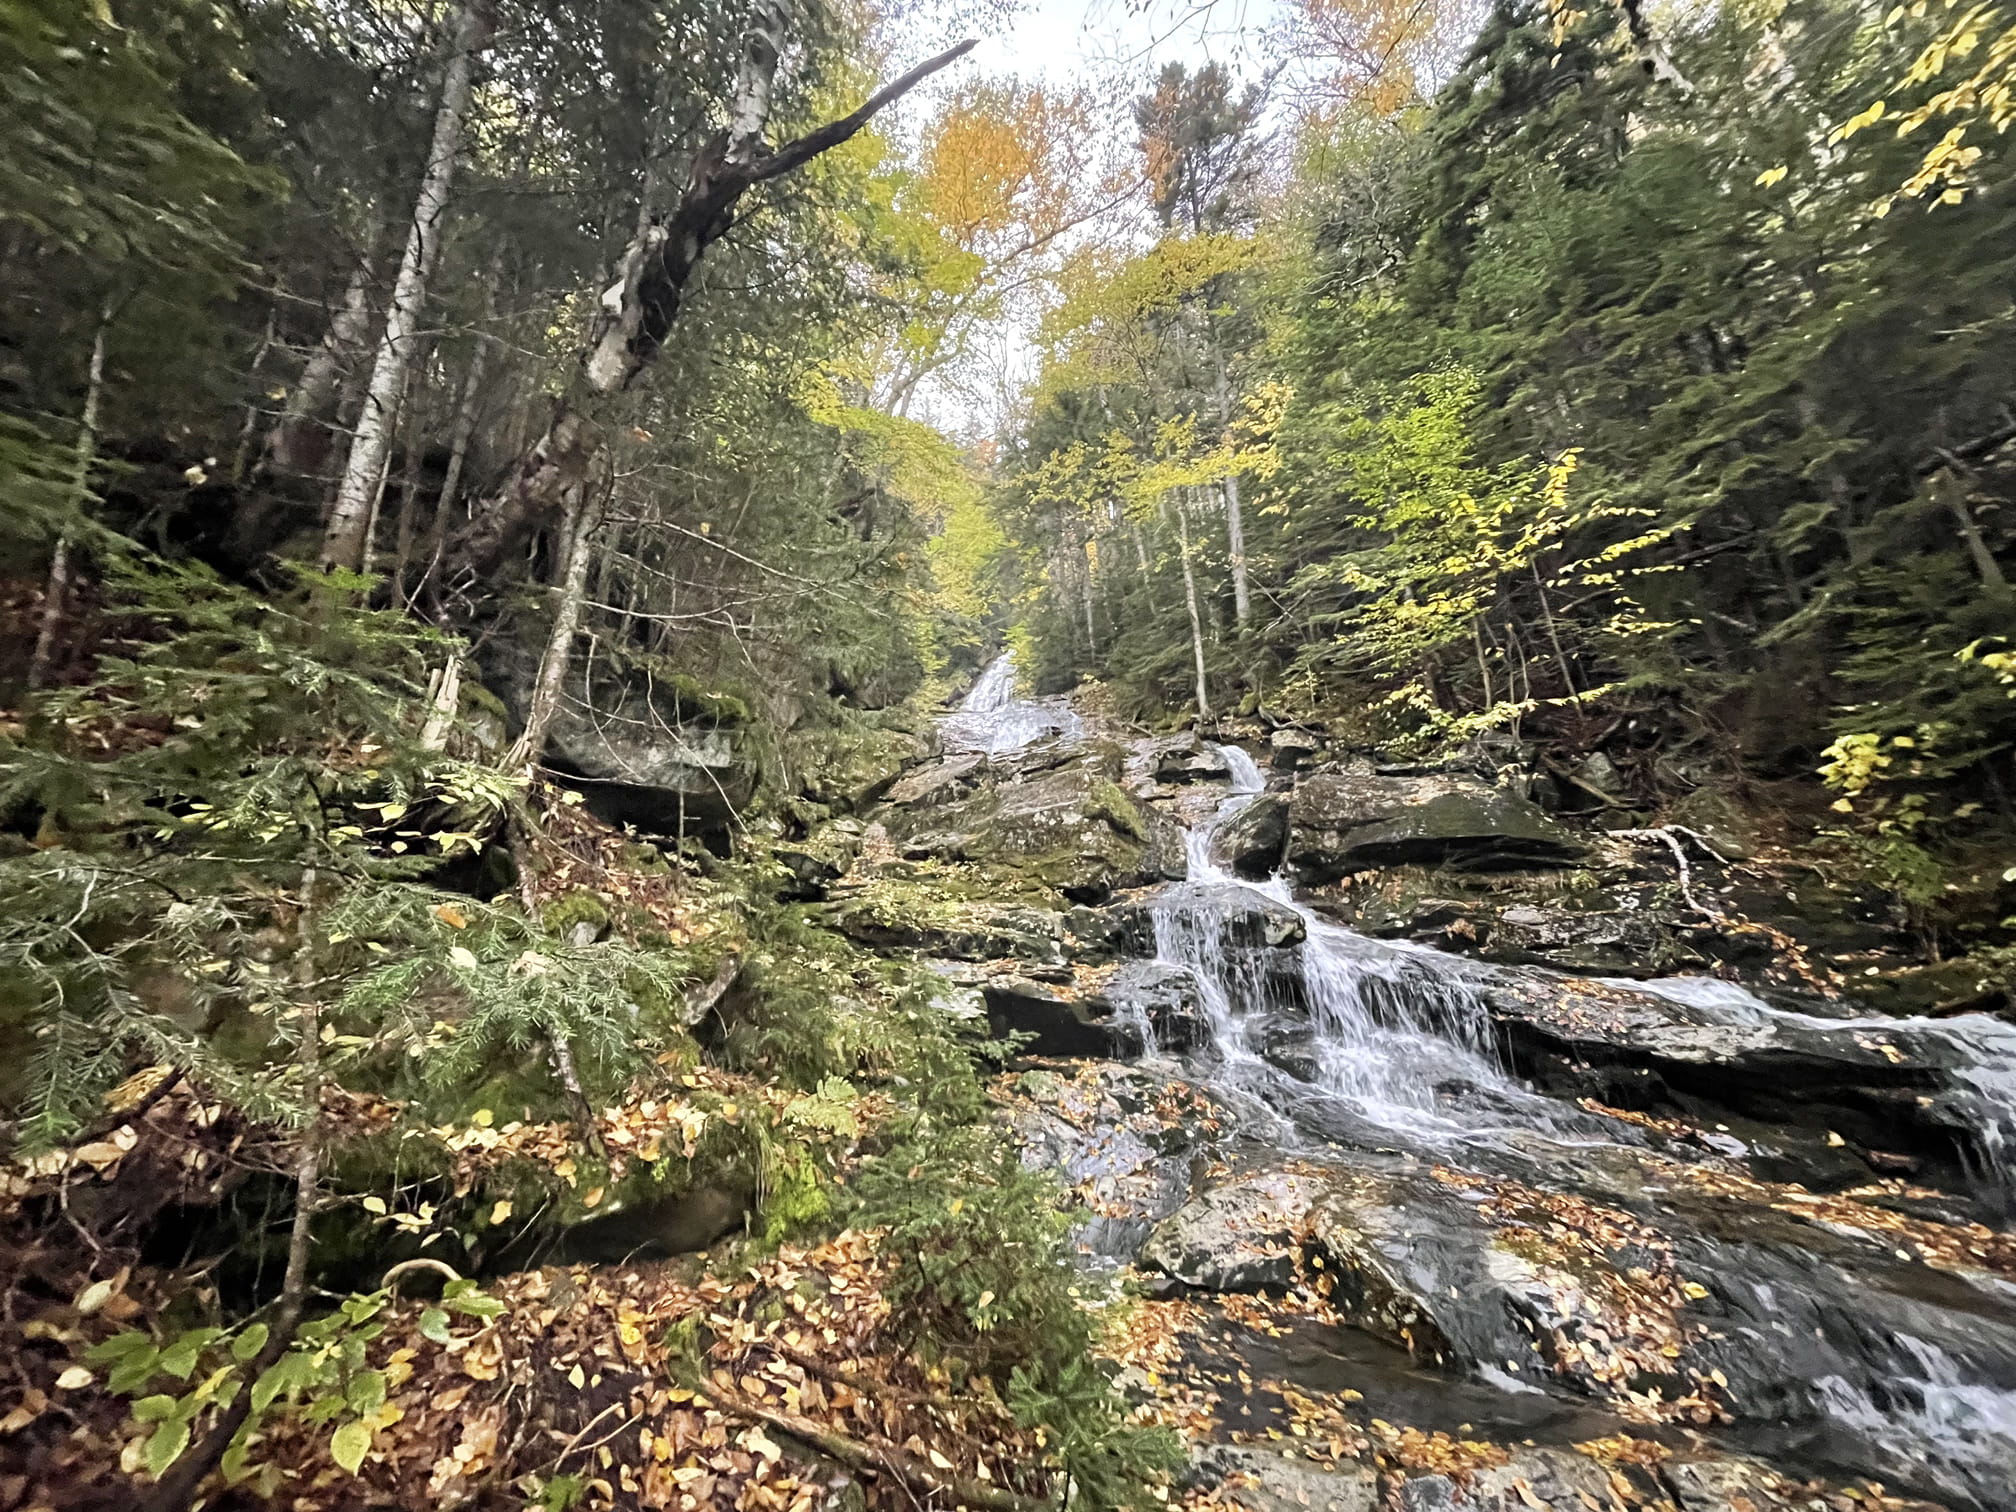 White mountain national forest is a beautiful hike to go on - it goes along a waterfall and is a bit of a climb but its a good workout and fucking beautiful. Was raining when i hiked which made the rocks a bit slippery but a wonderful experience.